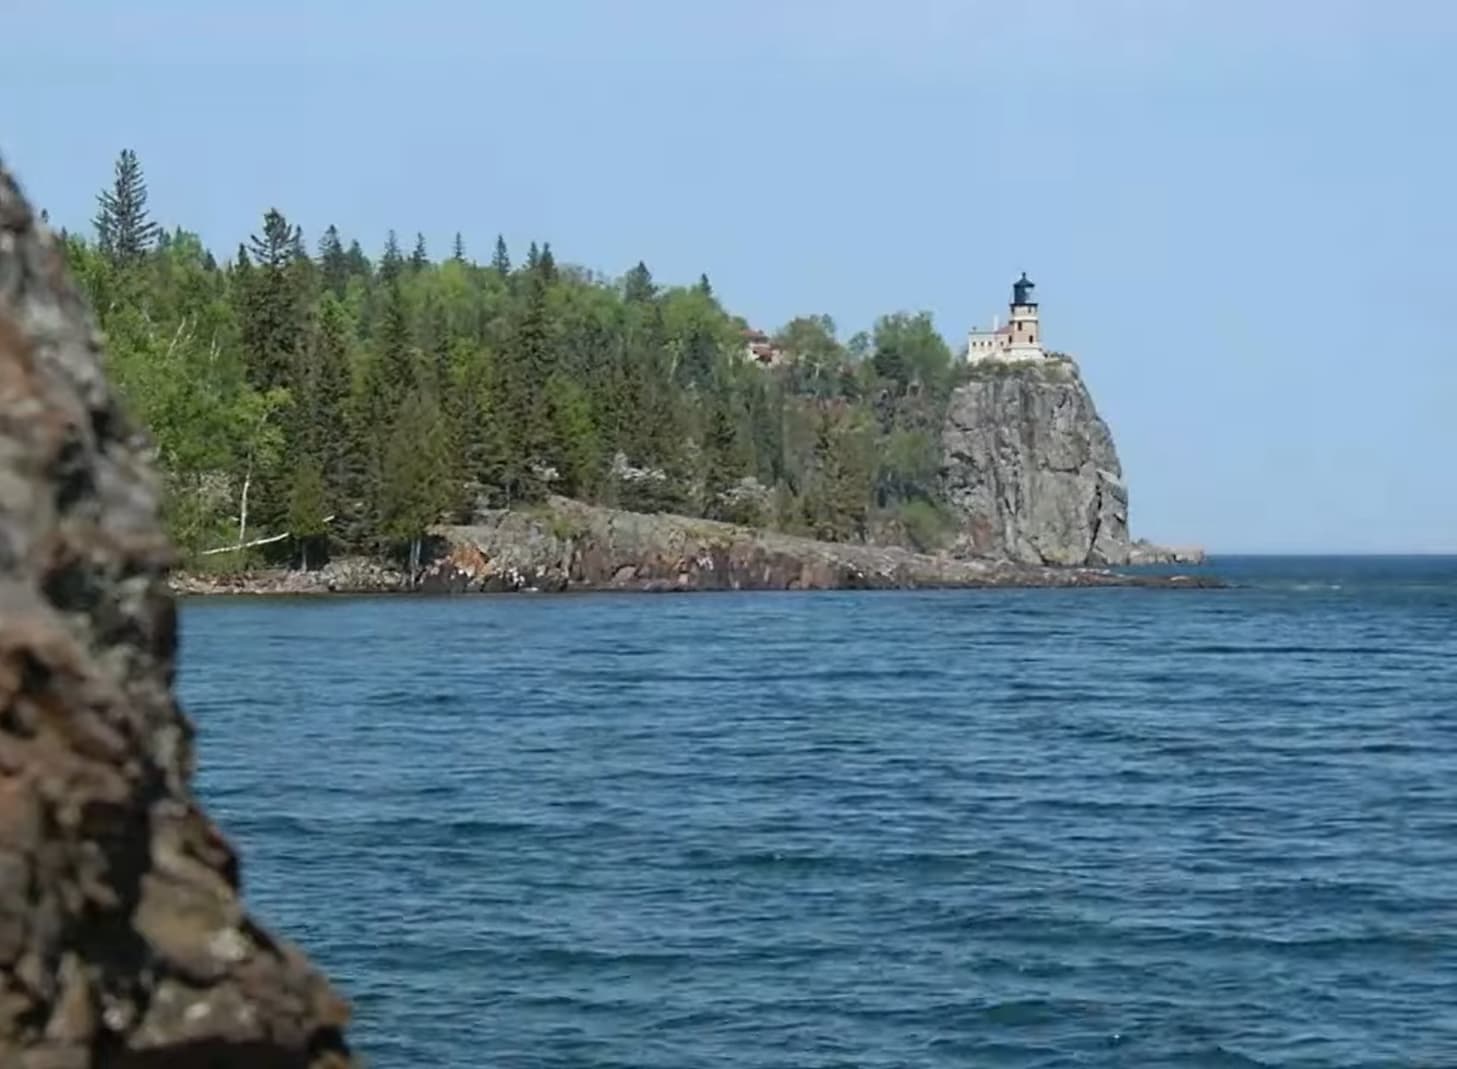 A lighthouse perched atop a steep cliff overlooking a tranquil blue lake